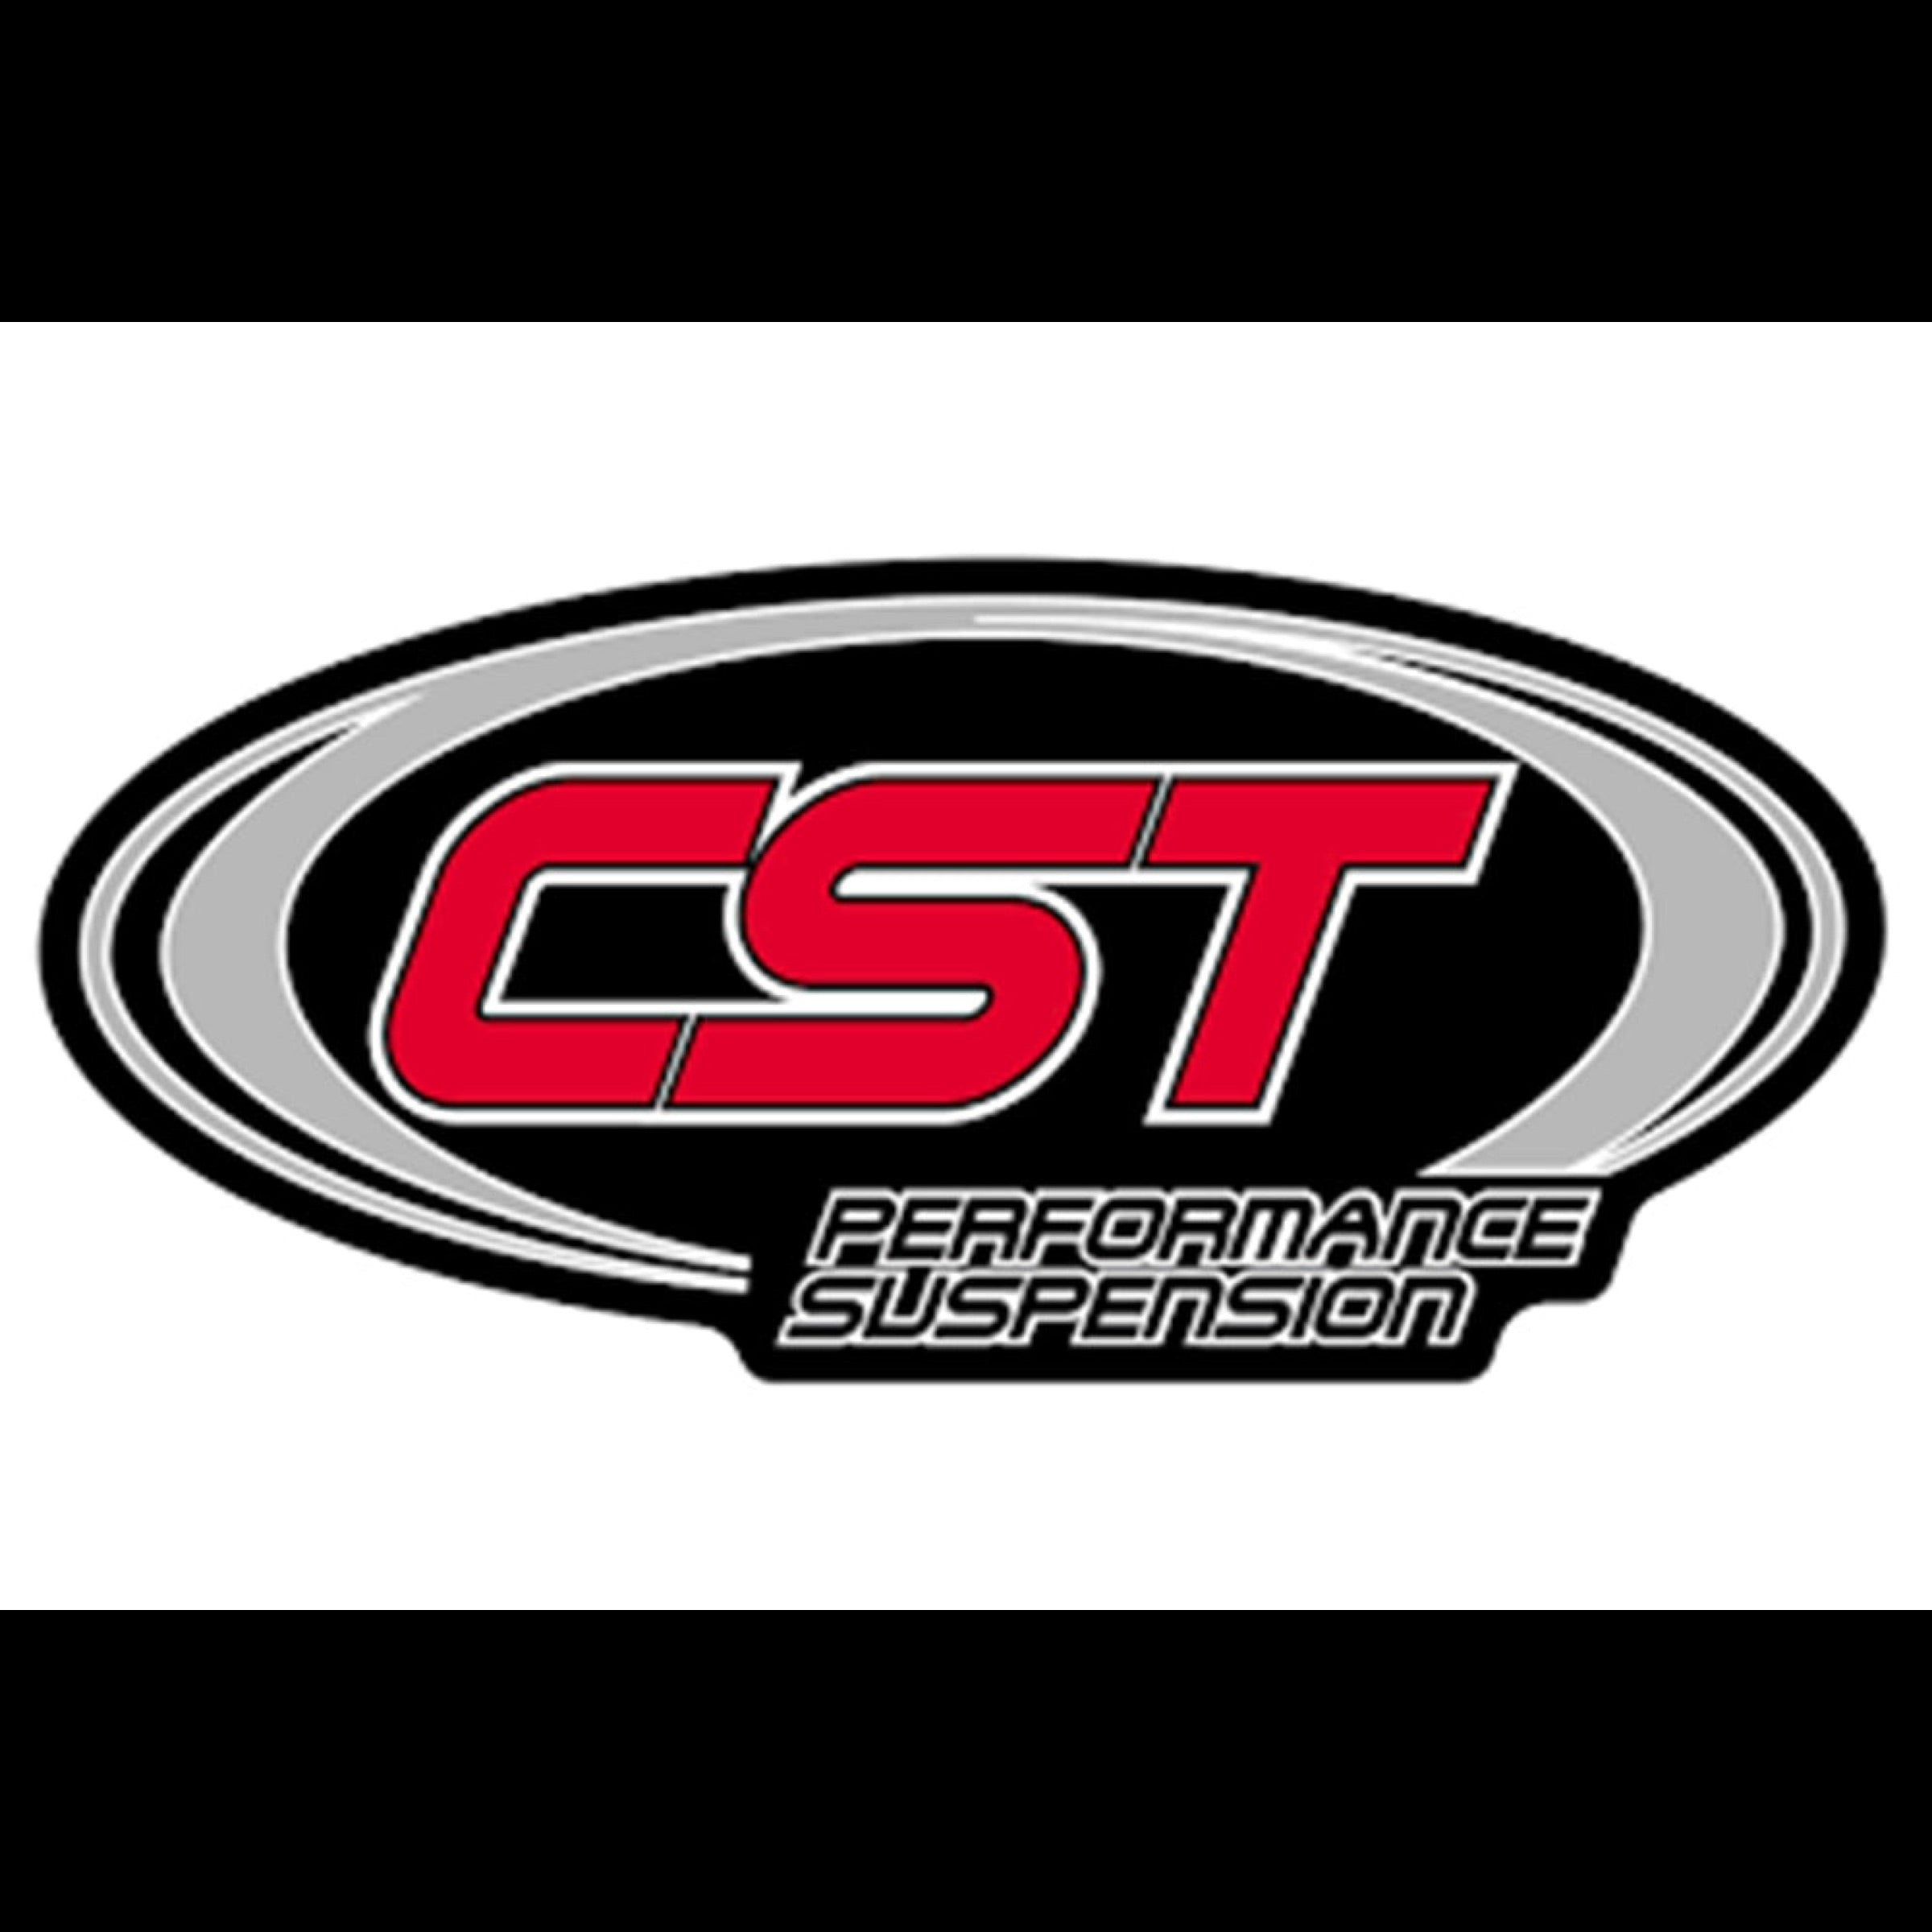 CST Performance Suspension logo with a white background